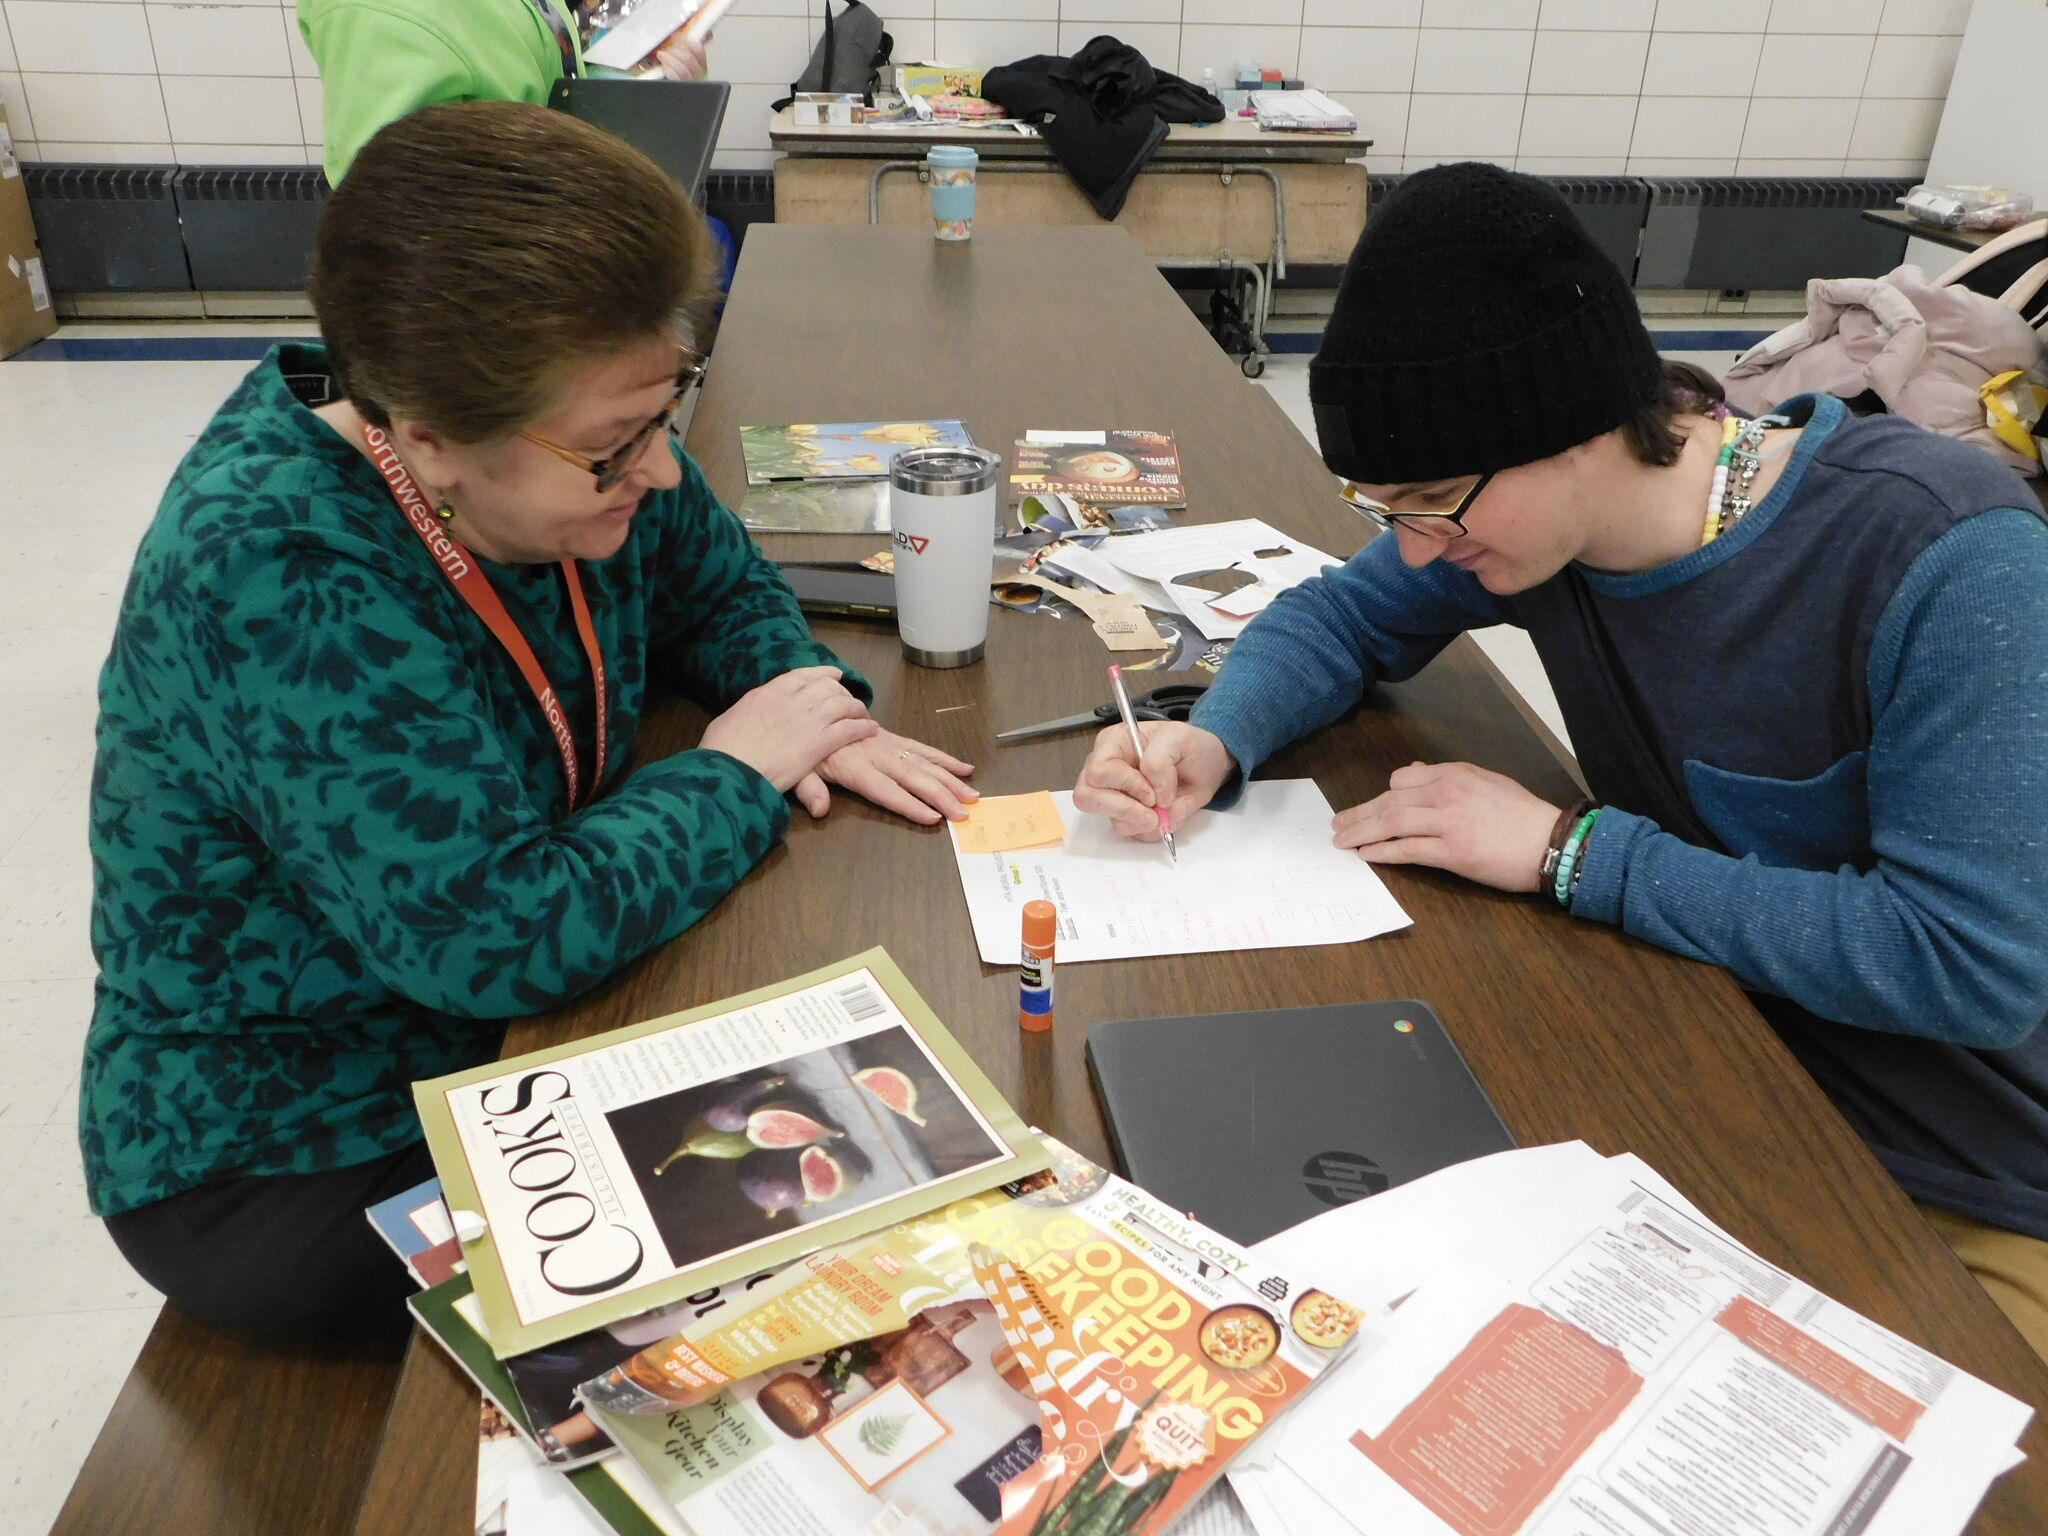 Winsted-based academy teaches ‘real life’ lessons